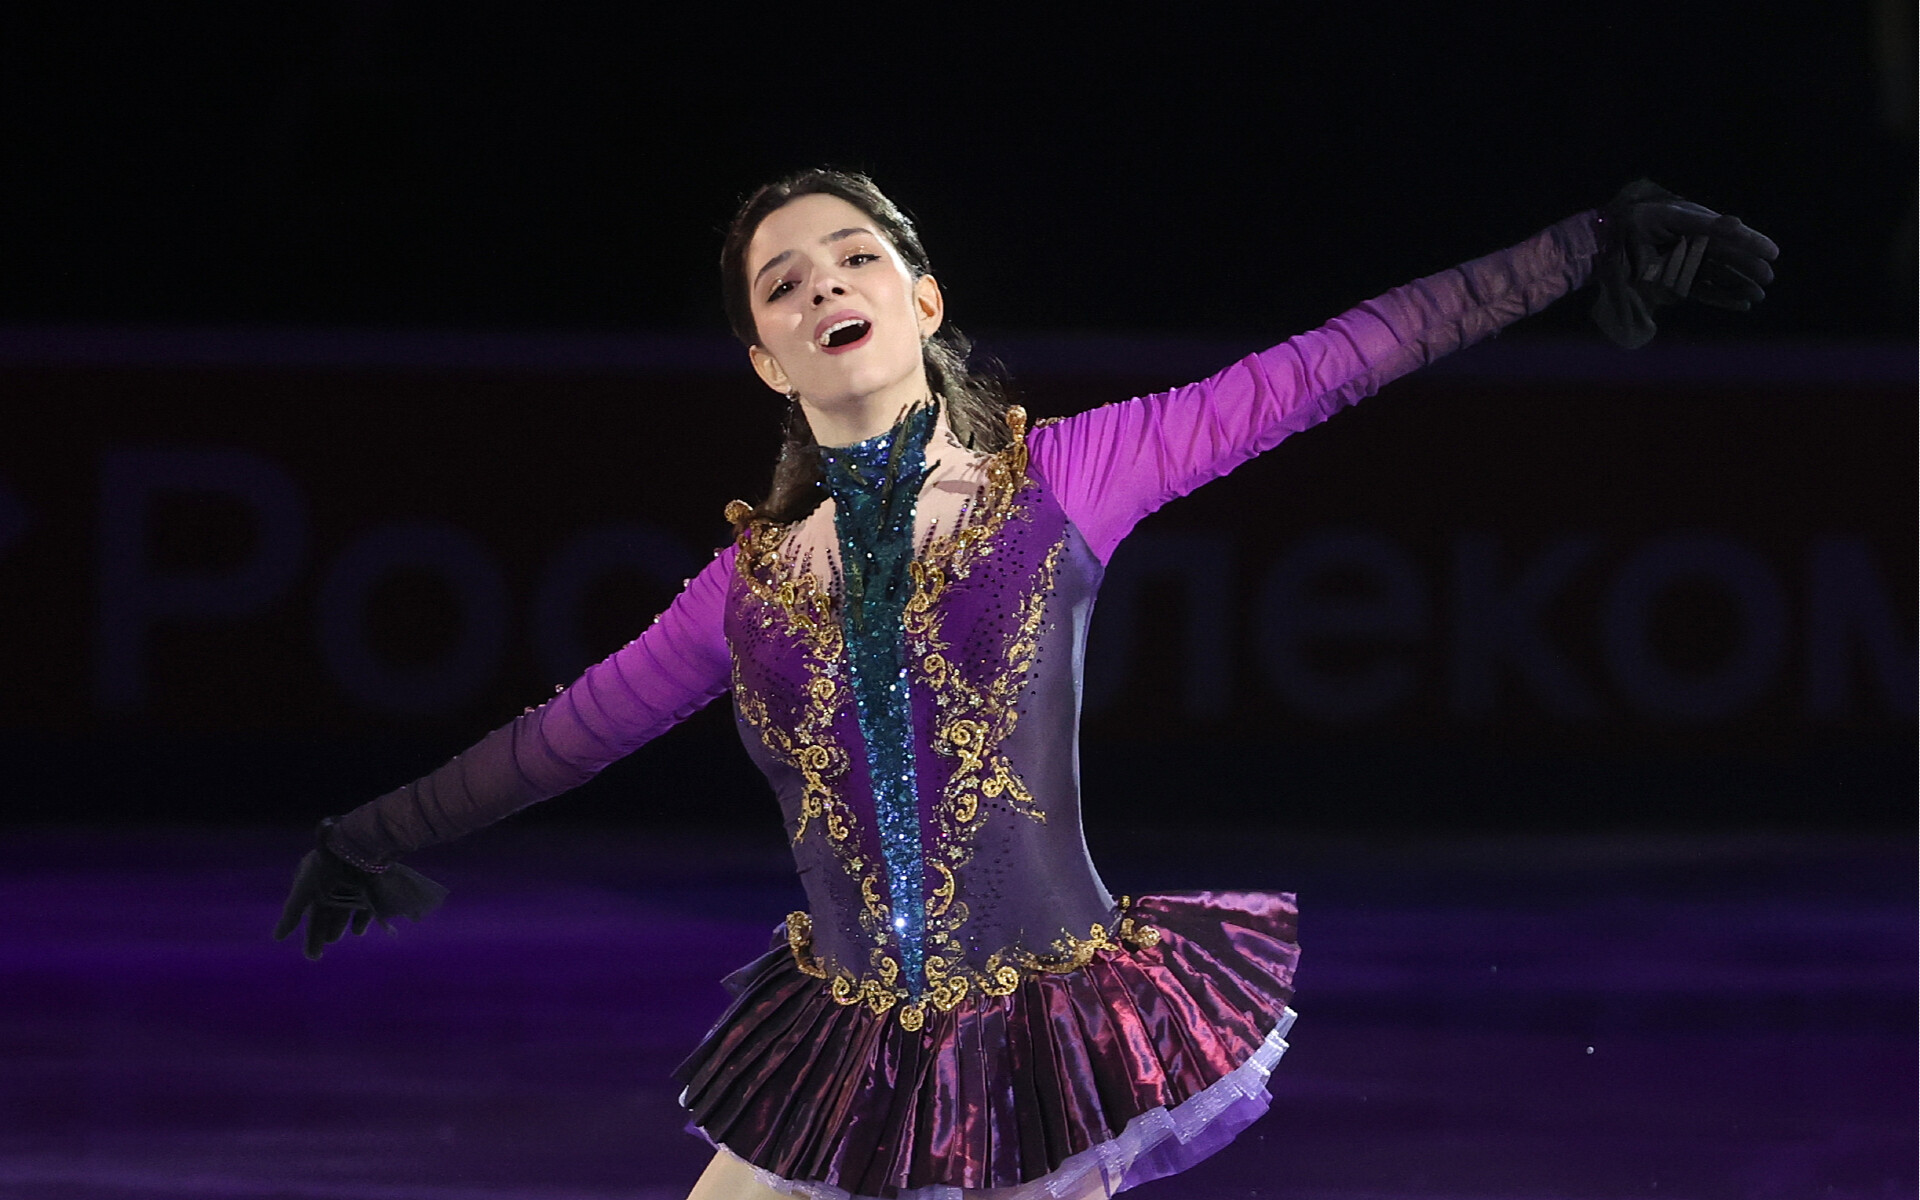 Evgenia Medvedeva: She finished fourth at the 2013 Russian Junior Championships. 1920x1200 HD Wallpaper.